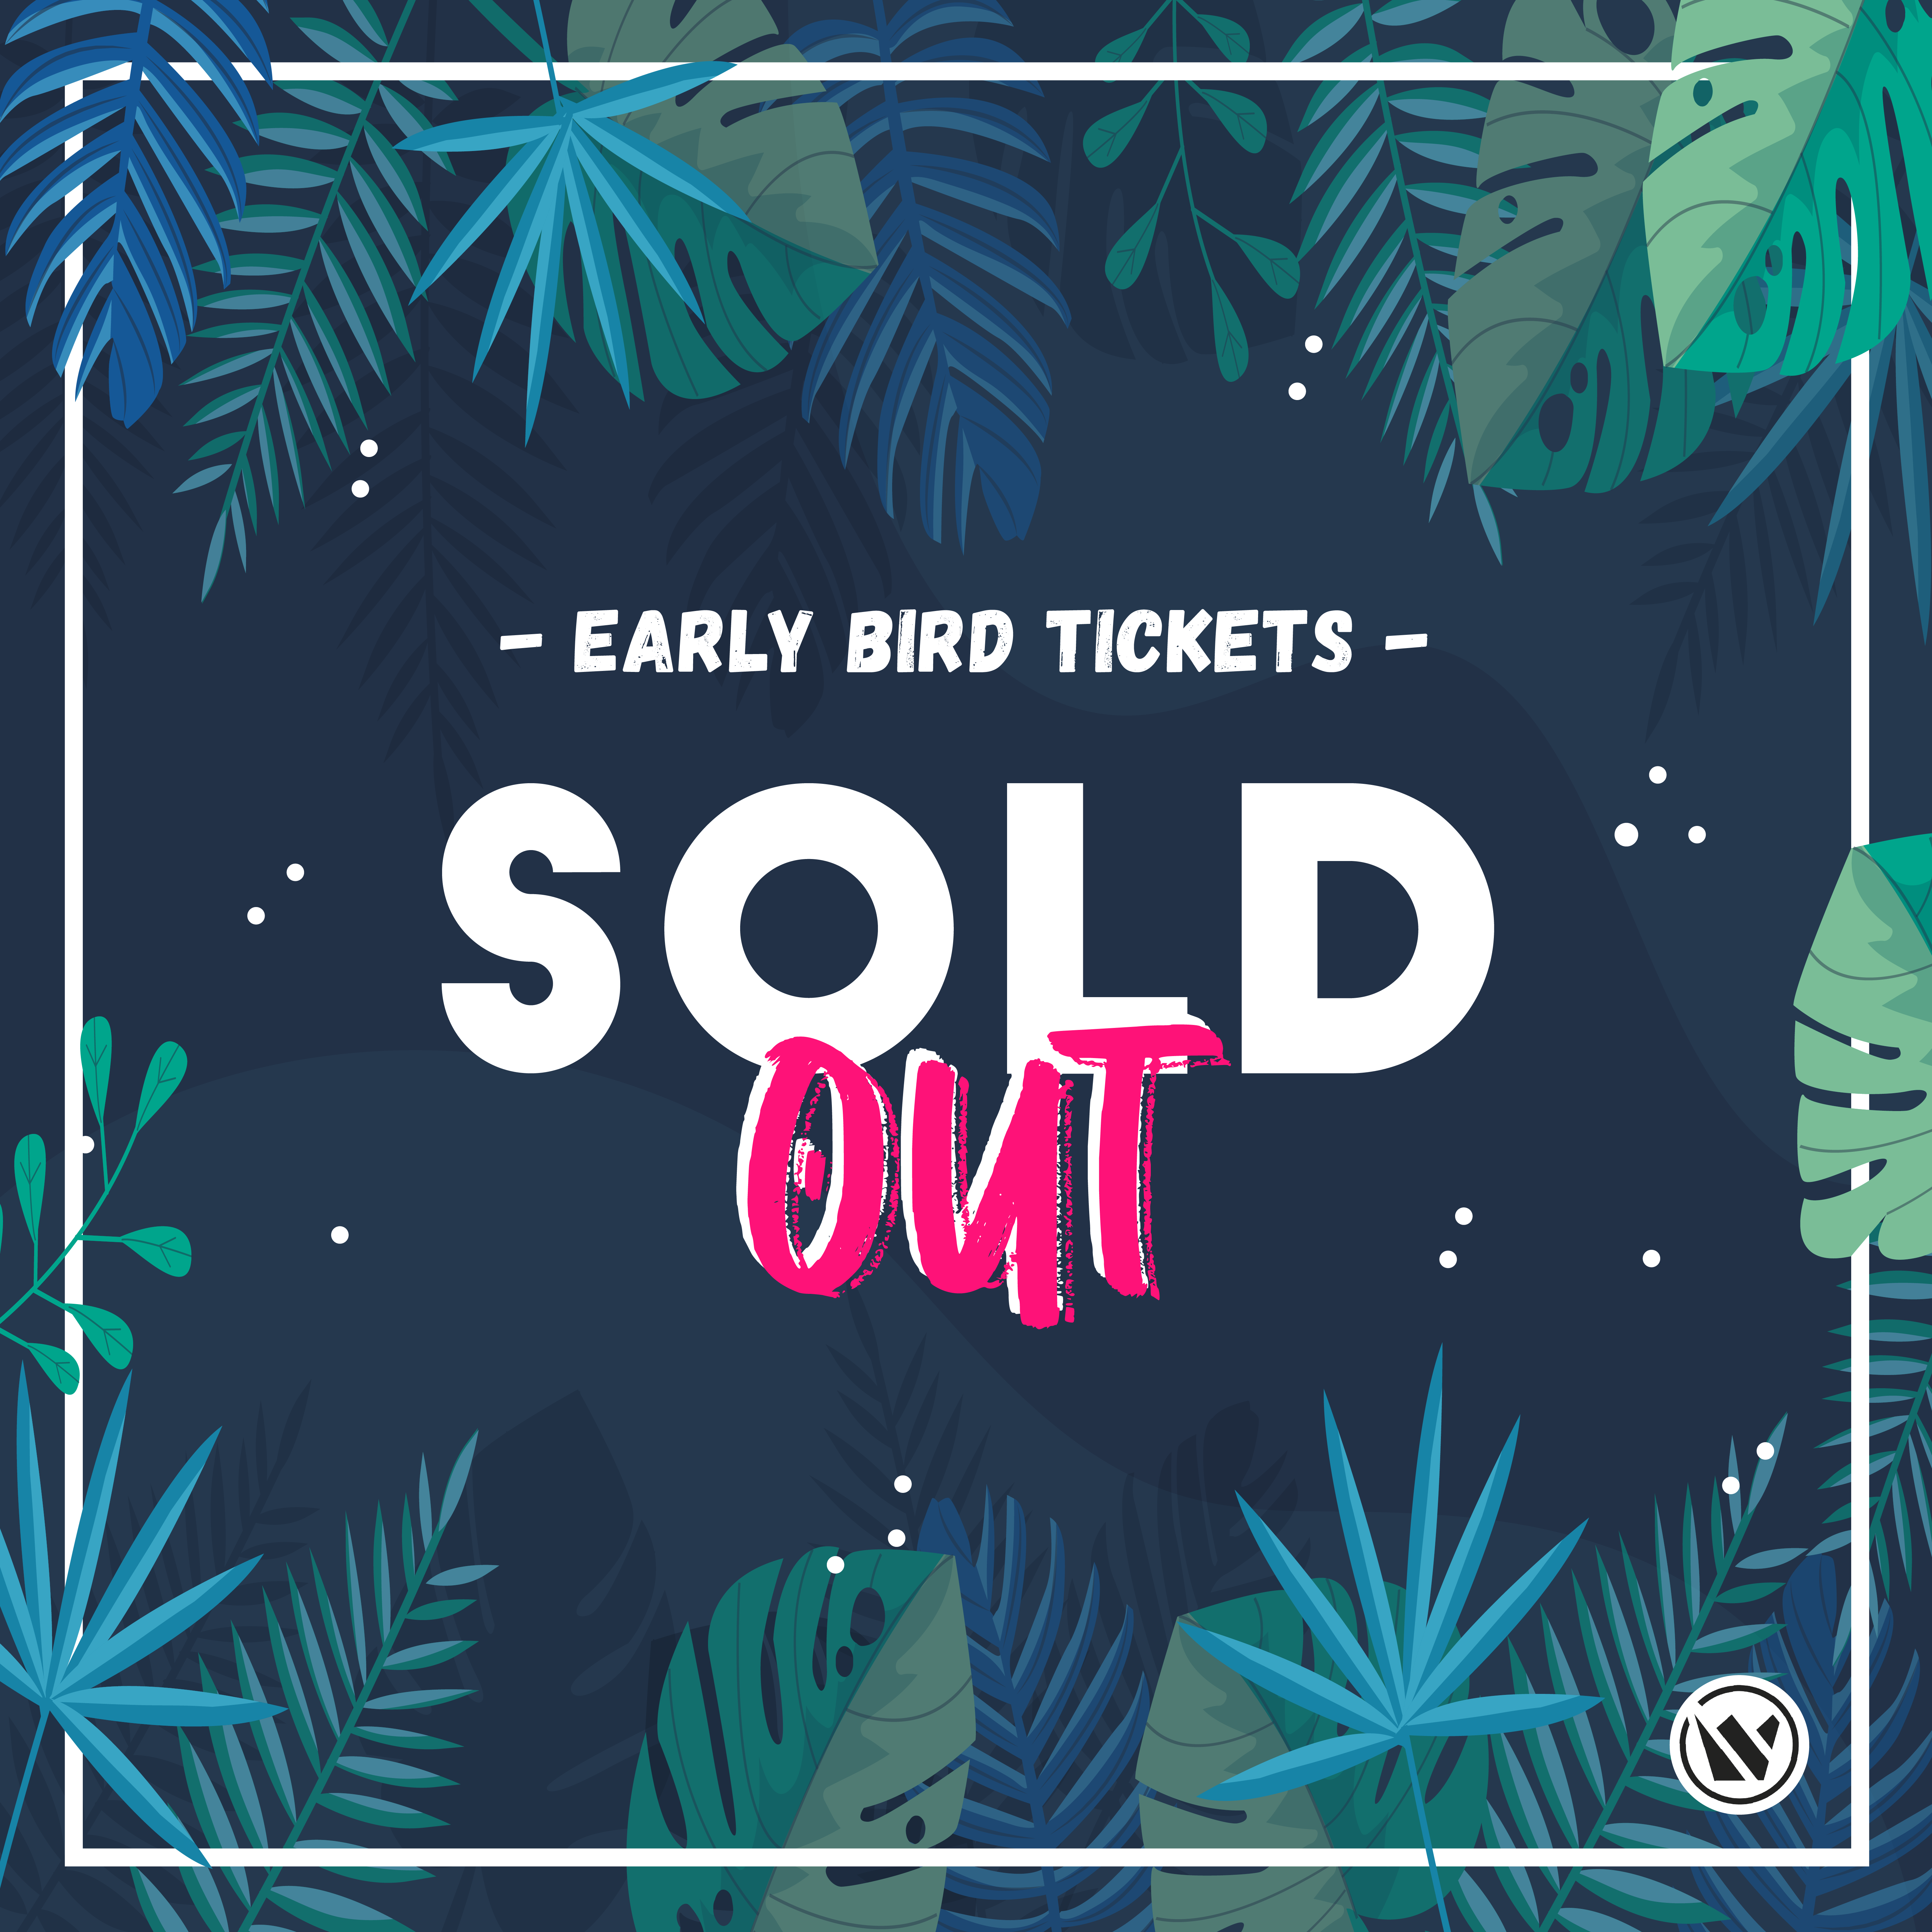 Design of Sold Out Event Post